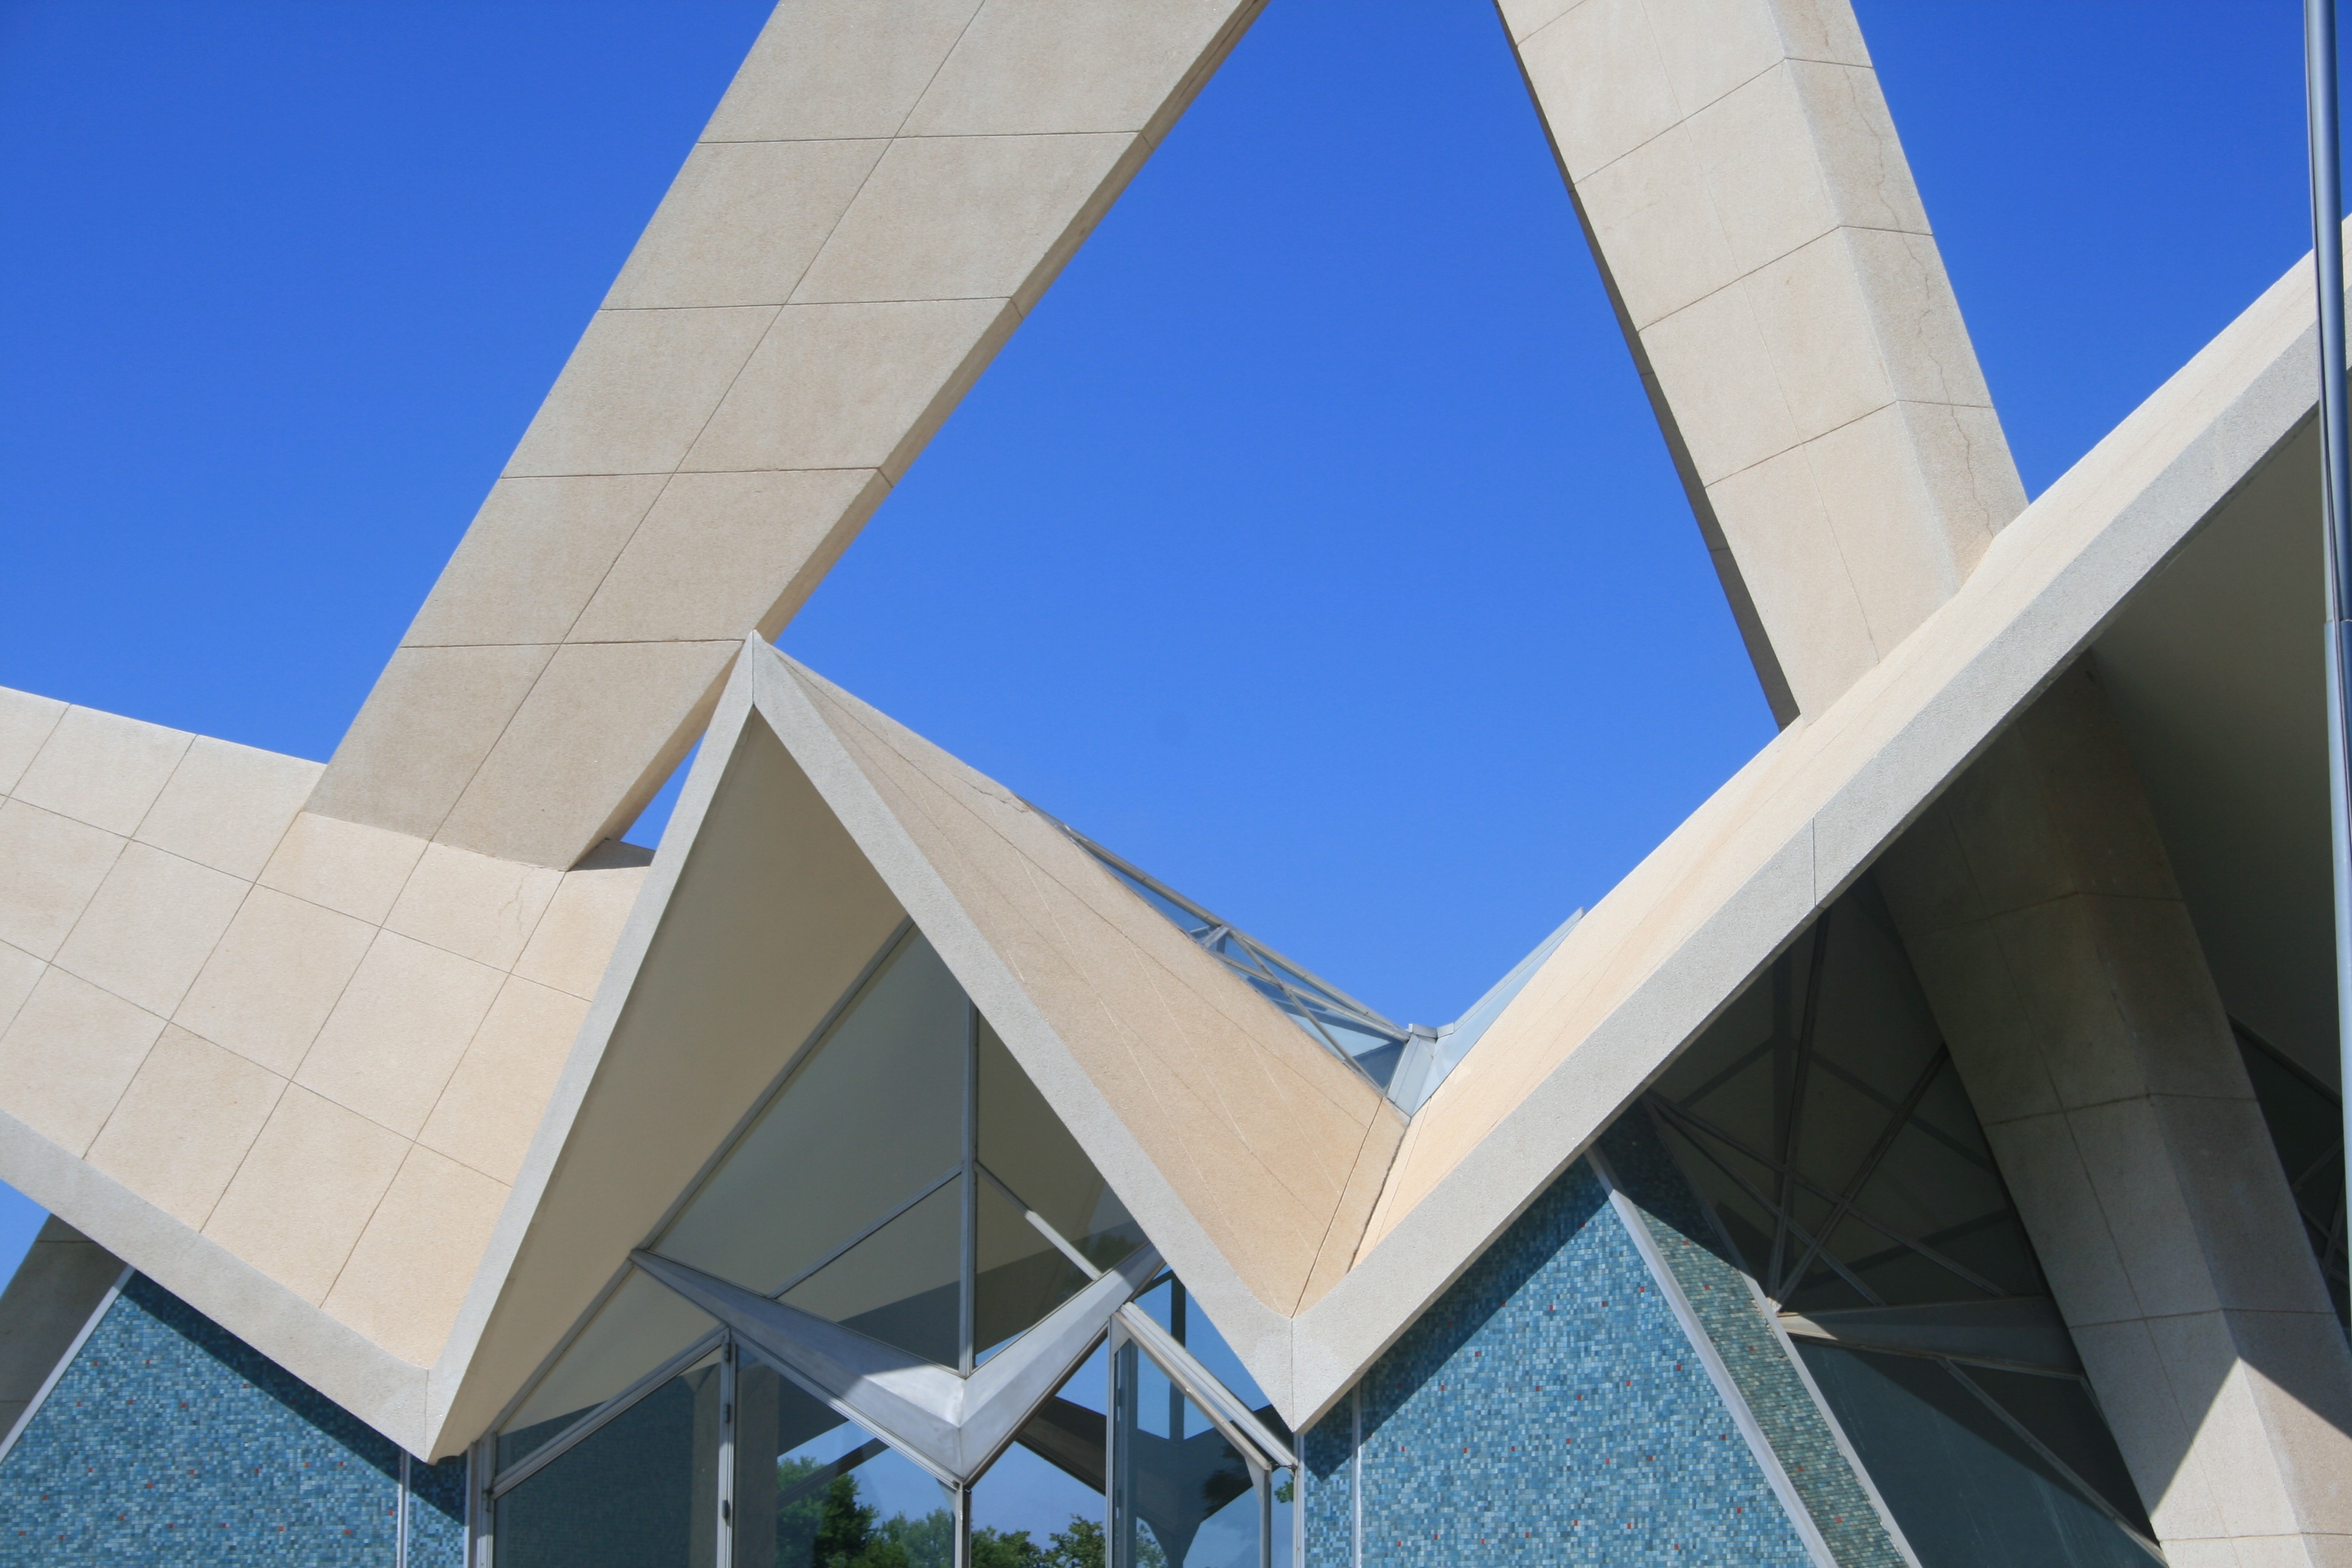 South African Air Force Memorial, triangle shape, blue